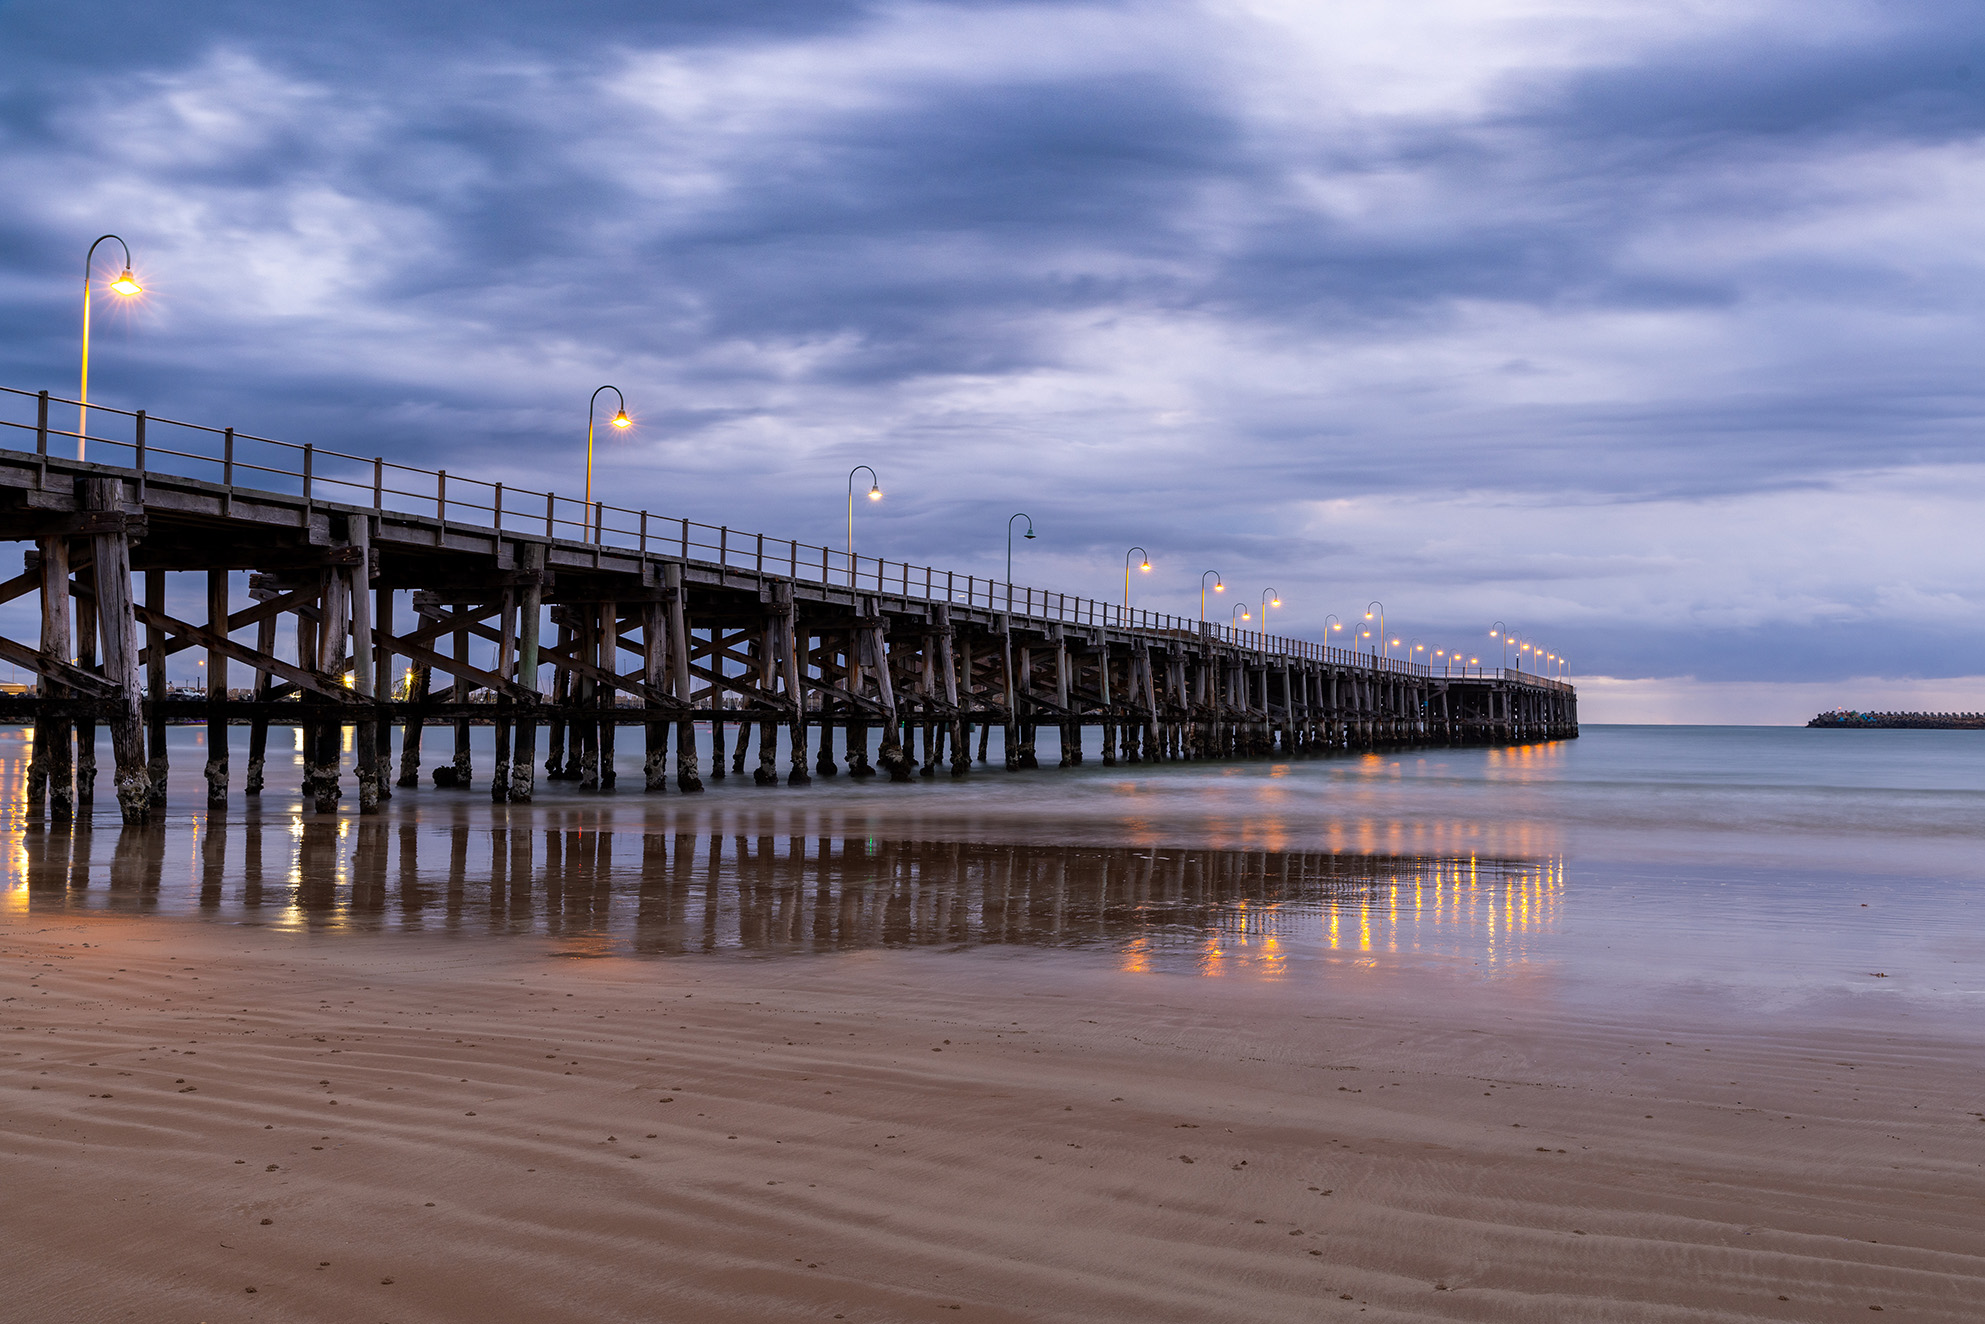 Coffs Harbour jetty at dusk and low tide, cloudy, moody sky and light posts on